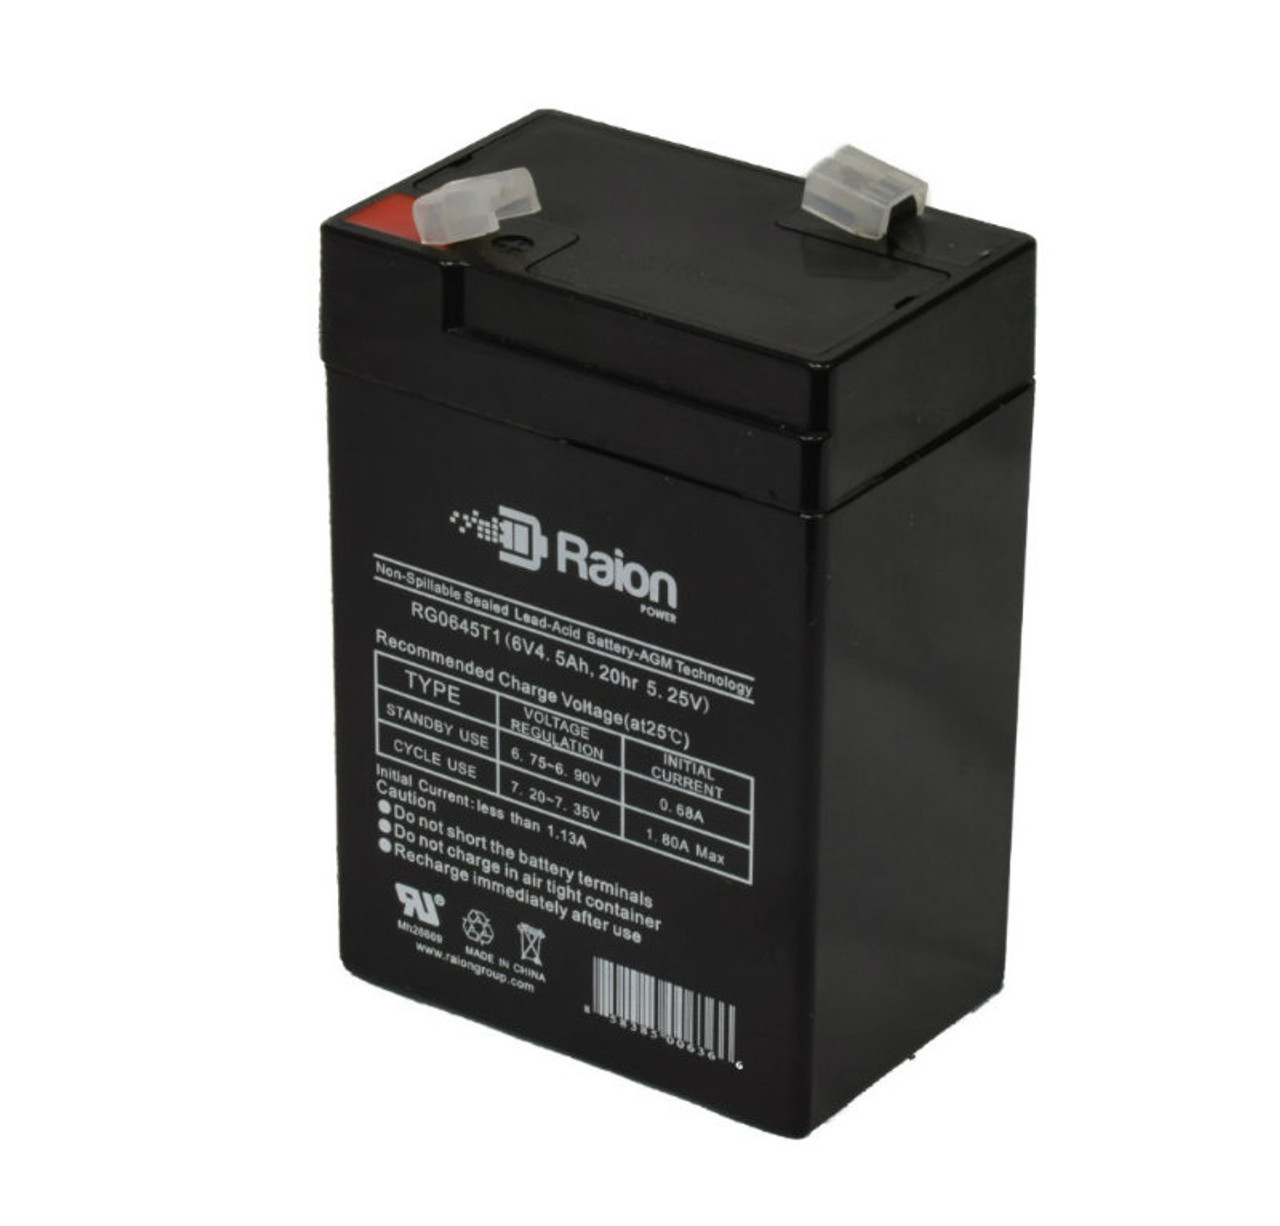 Raion Power RG0645T1 6V 4.5Ah Replacement Battery Cartridge for Champion NP4.5-6